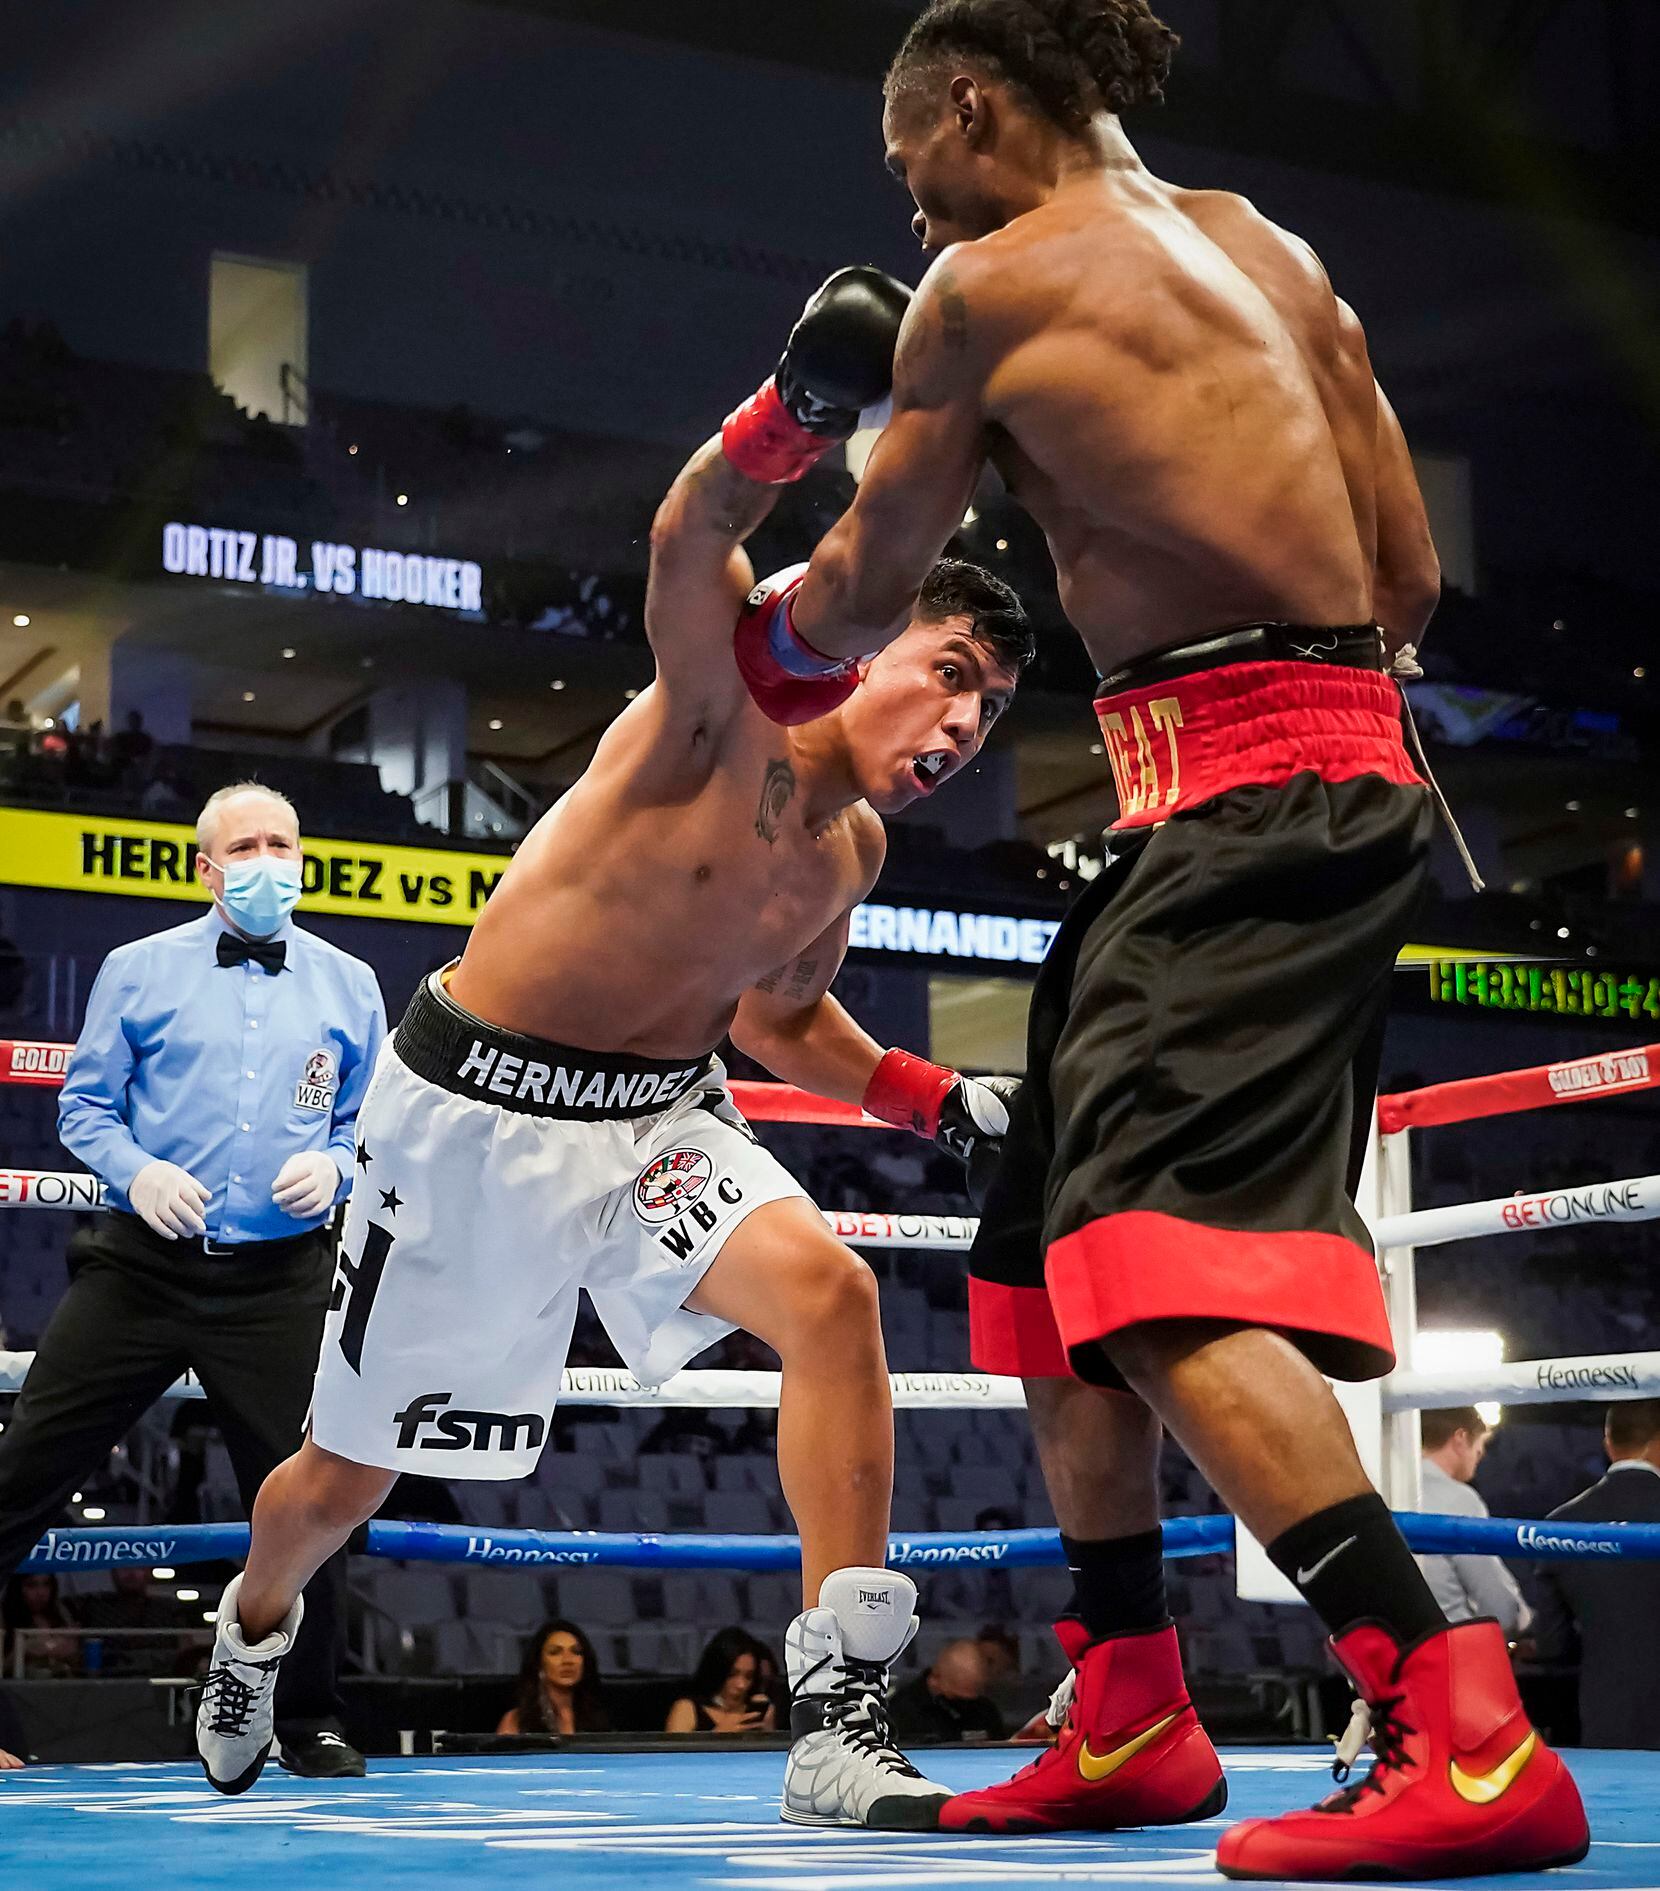 Luis Hernandez (left) fights Alex Martin in a super lightweight bout at Dickies Arena on Saturday, March 20, 2021, in Fort Worth.